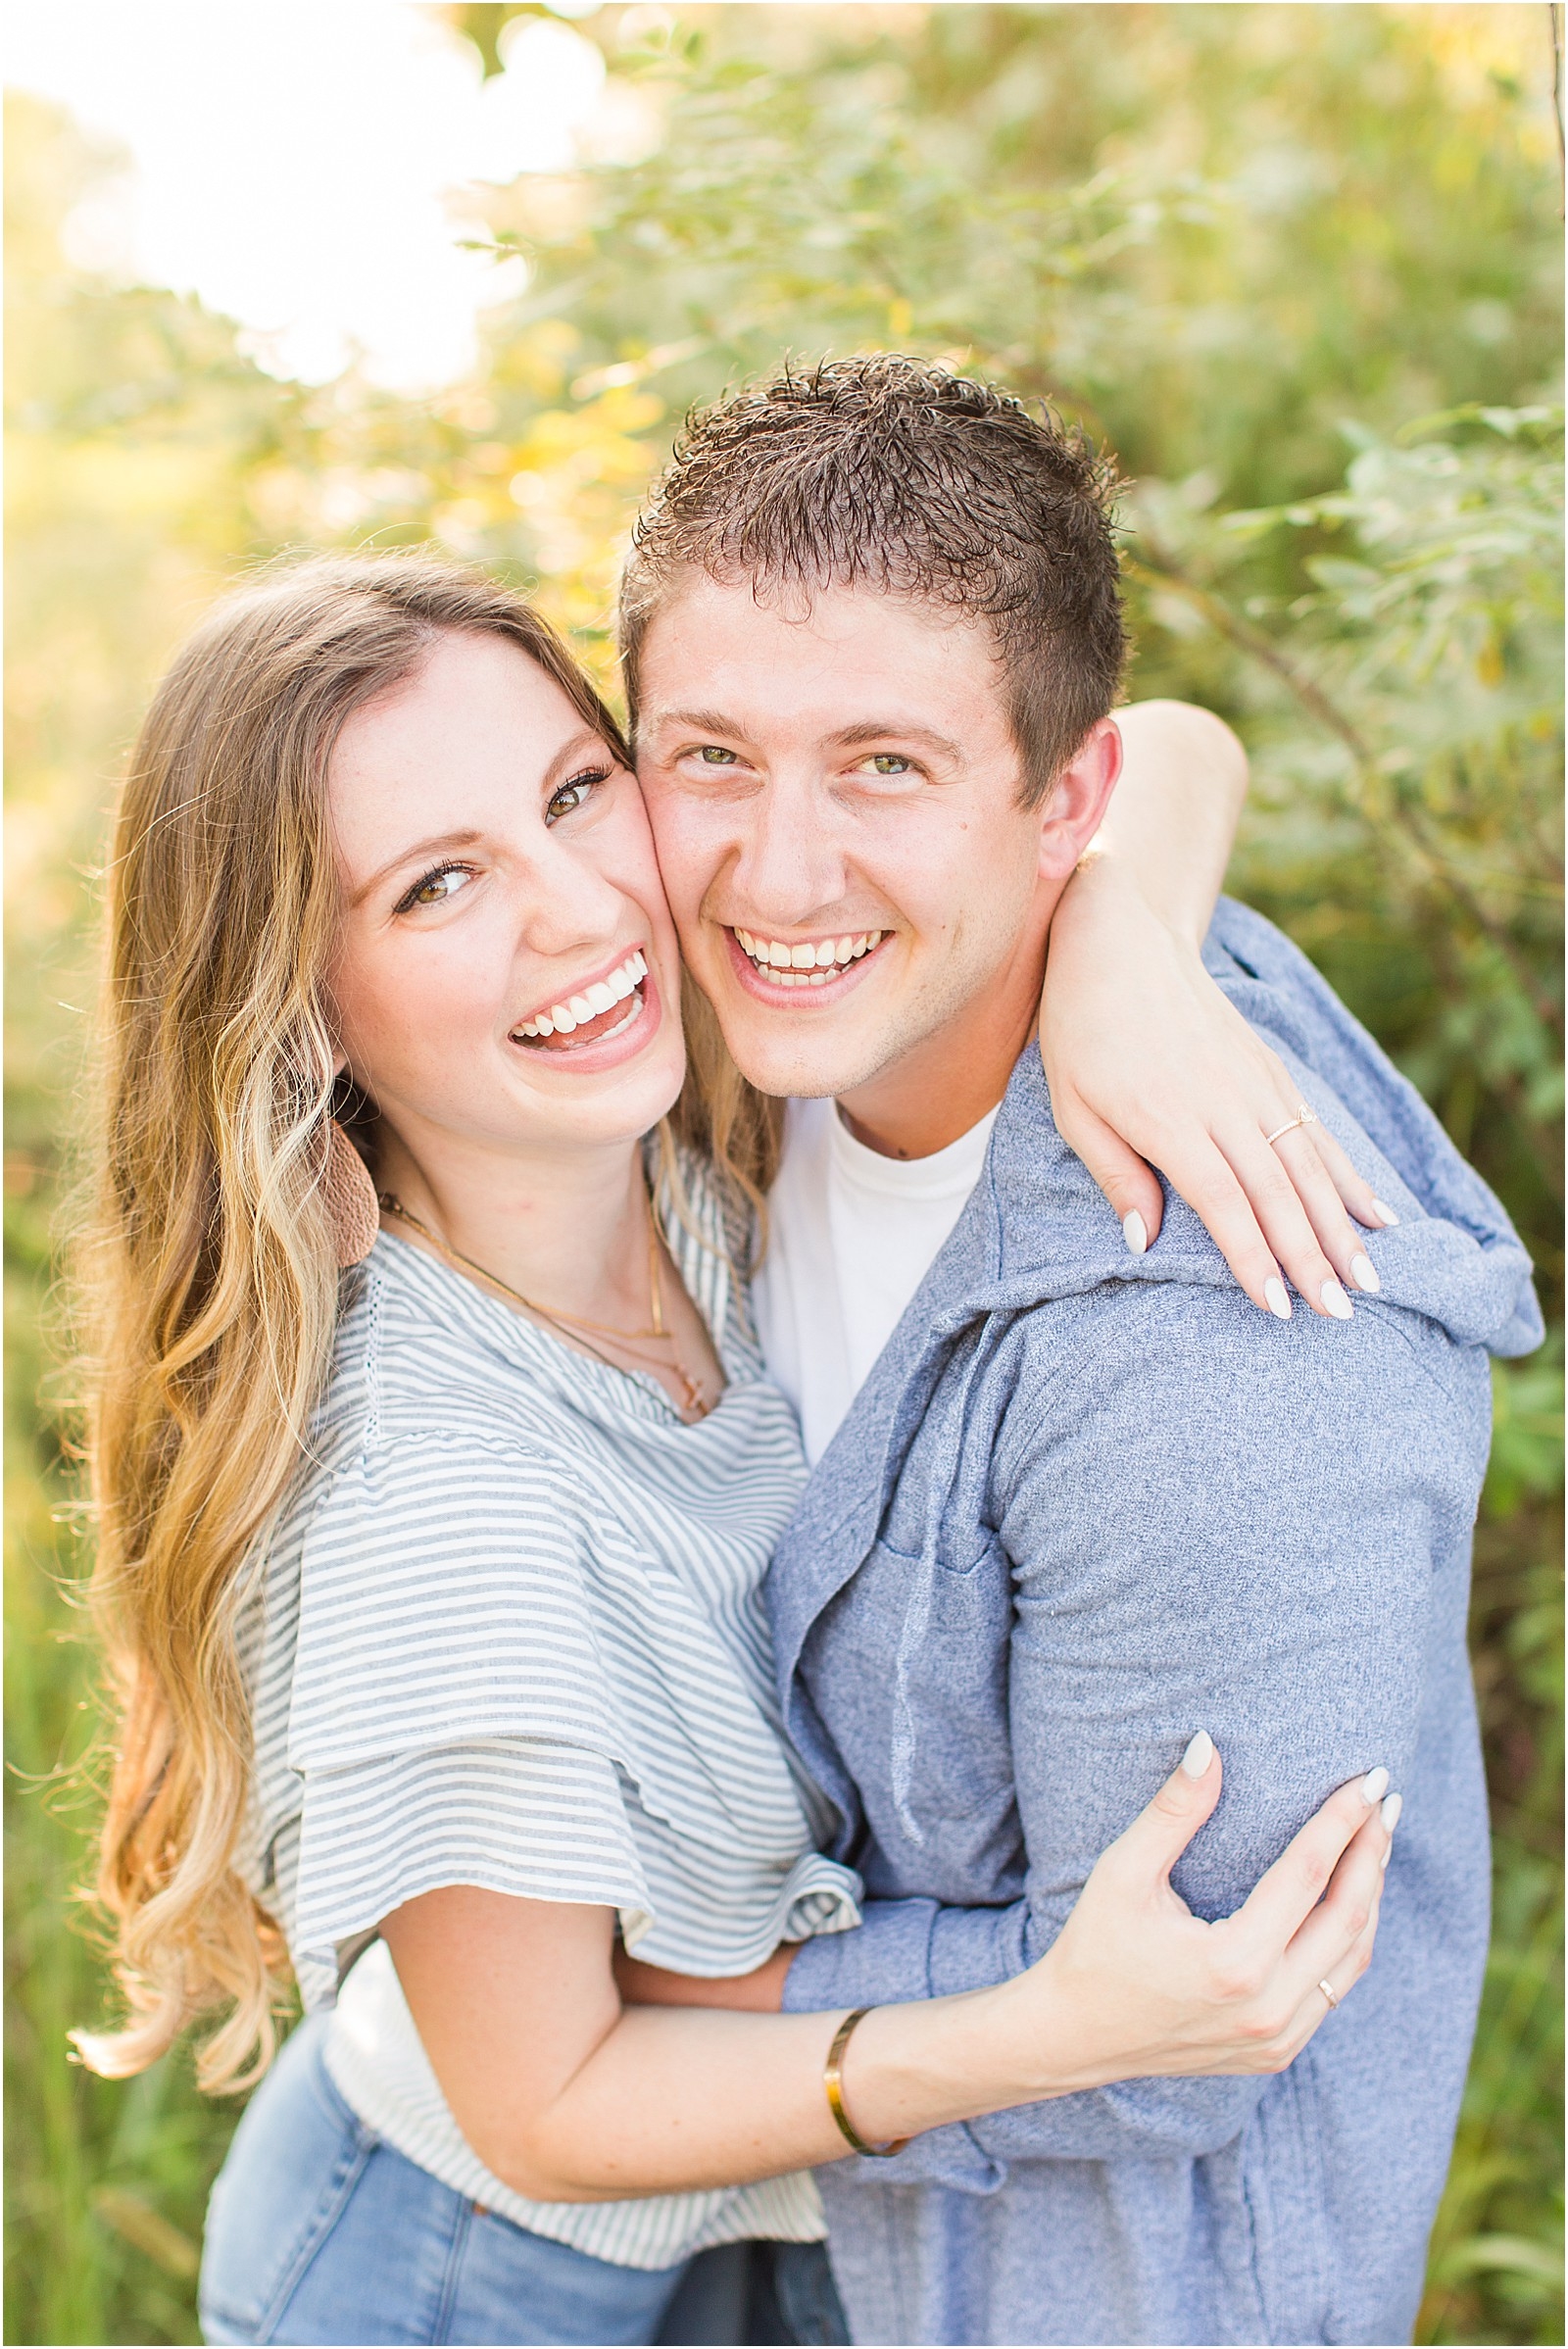 A Jasper Indiana Engagement Session | Tori and Kyle | Bret and Brandie Photography010.jpg